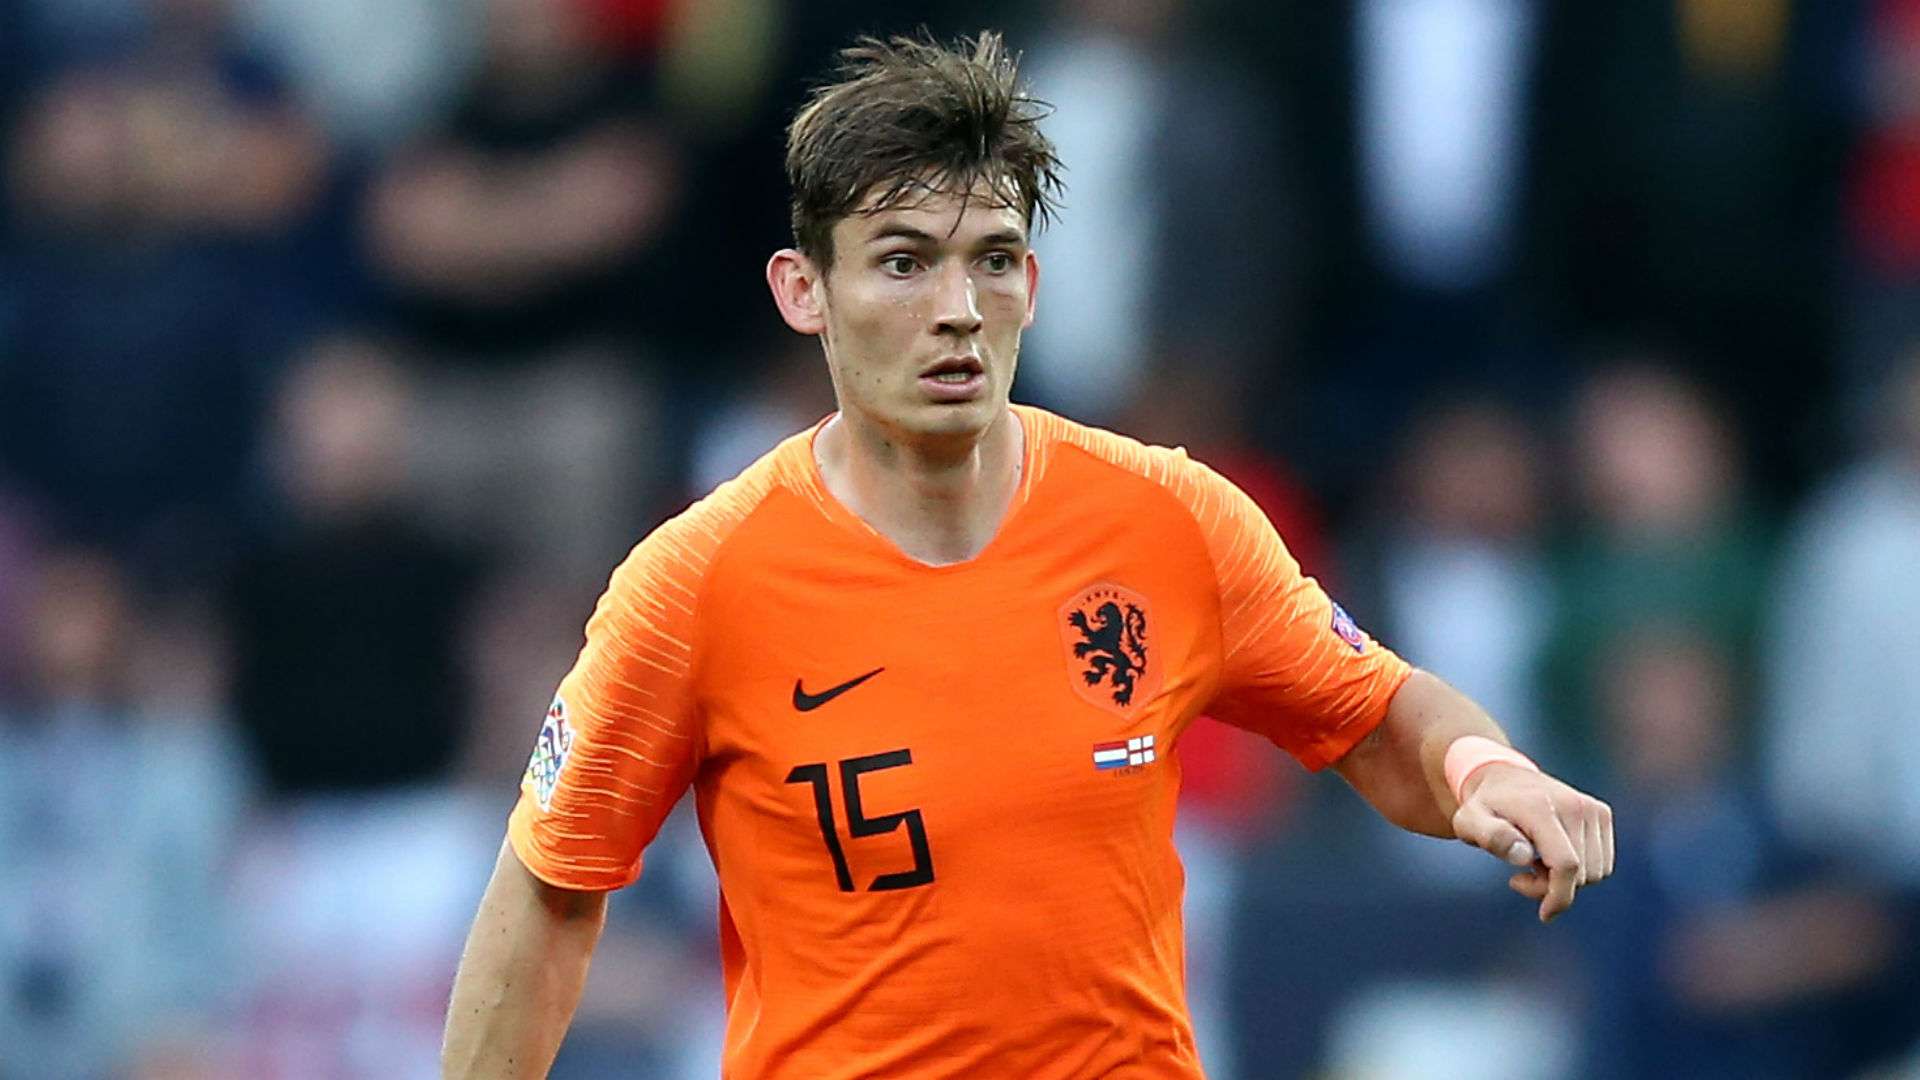 Nations League final: 'He makes everything easier' - De Roon reveals what it's like to play beside Barca-bound superstar Frenkie de Jong | Goal.com